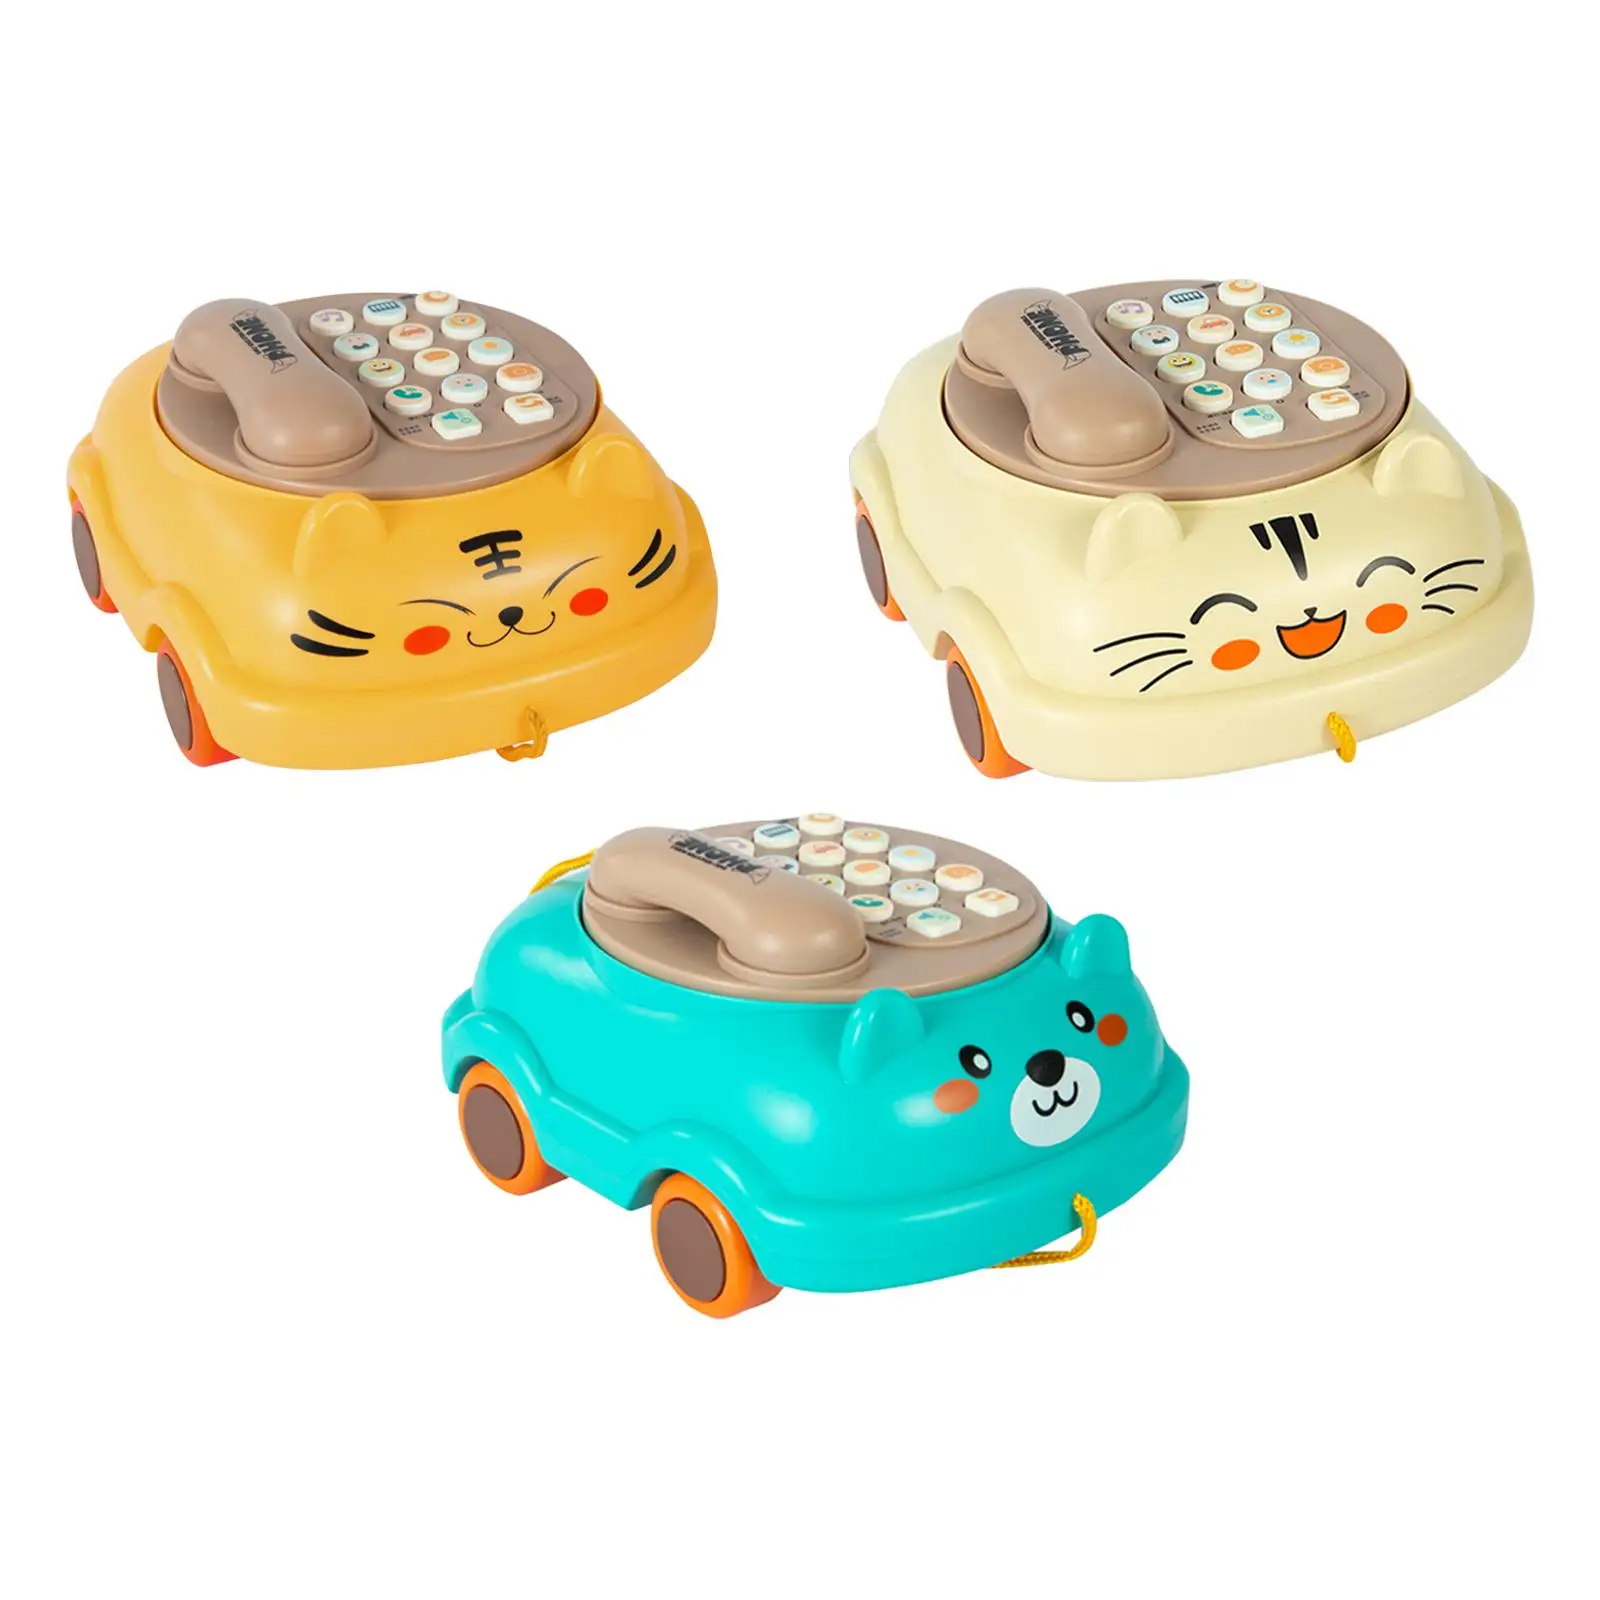 Kid Phone Cognitive Development Toy Lights Piano Early Learning Toy Phones Toy for Preschool Educational Learning Girl